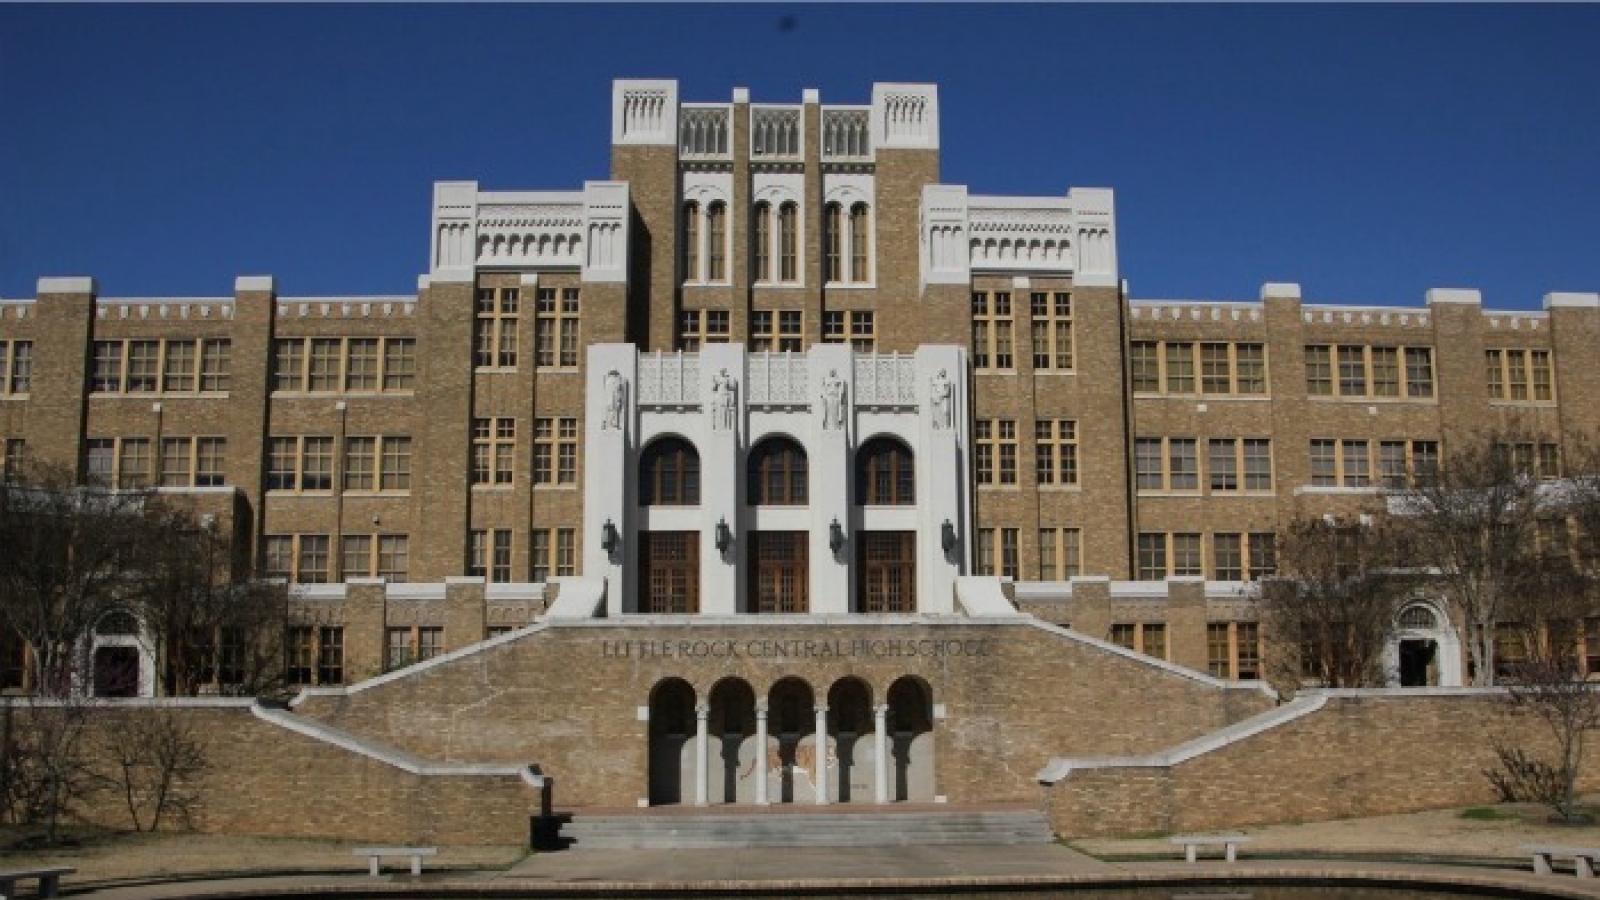 The building entrance of Little Rock Central High School.